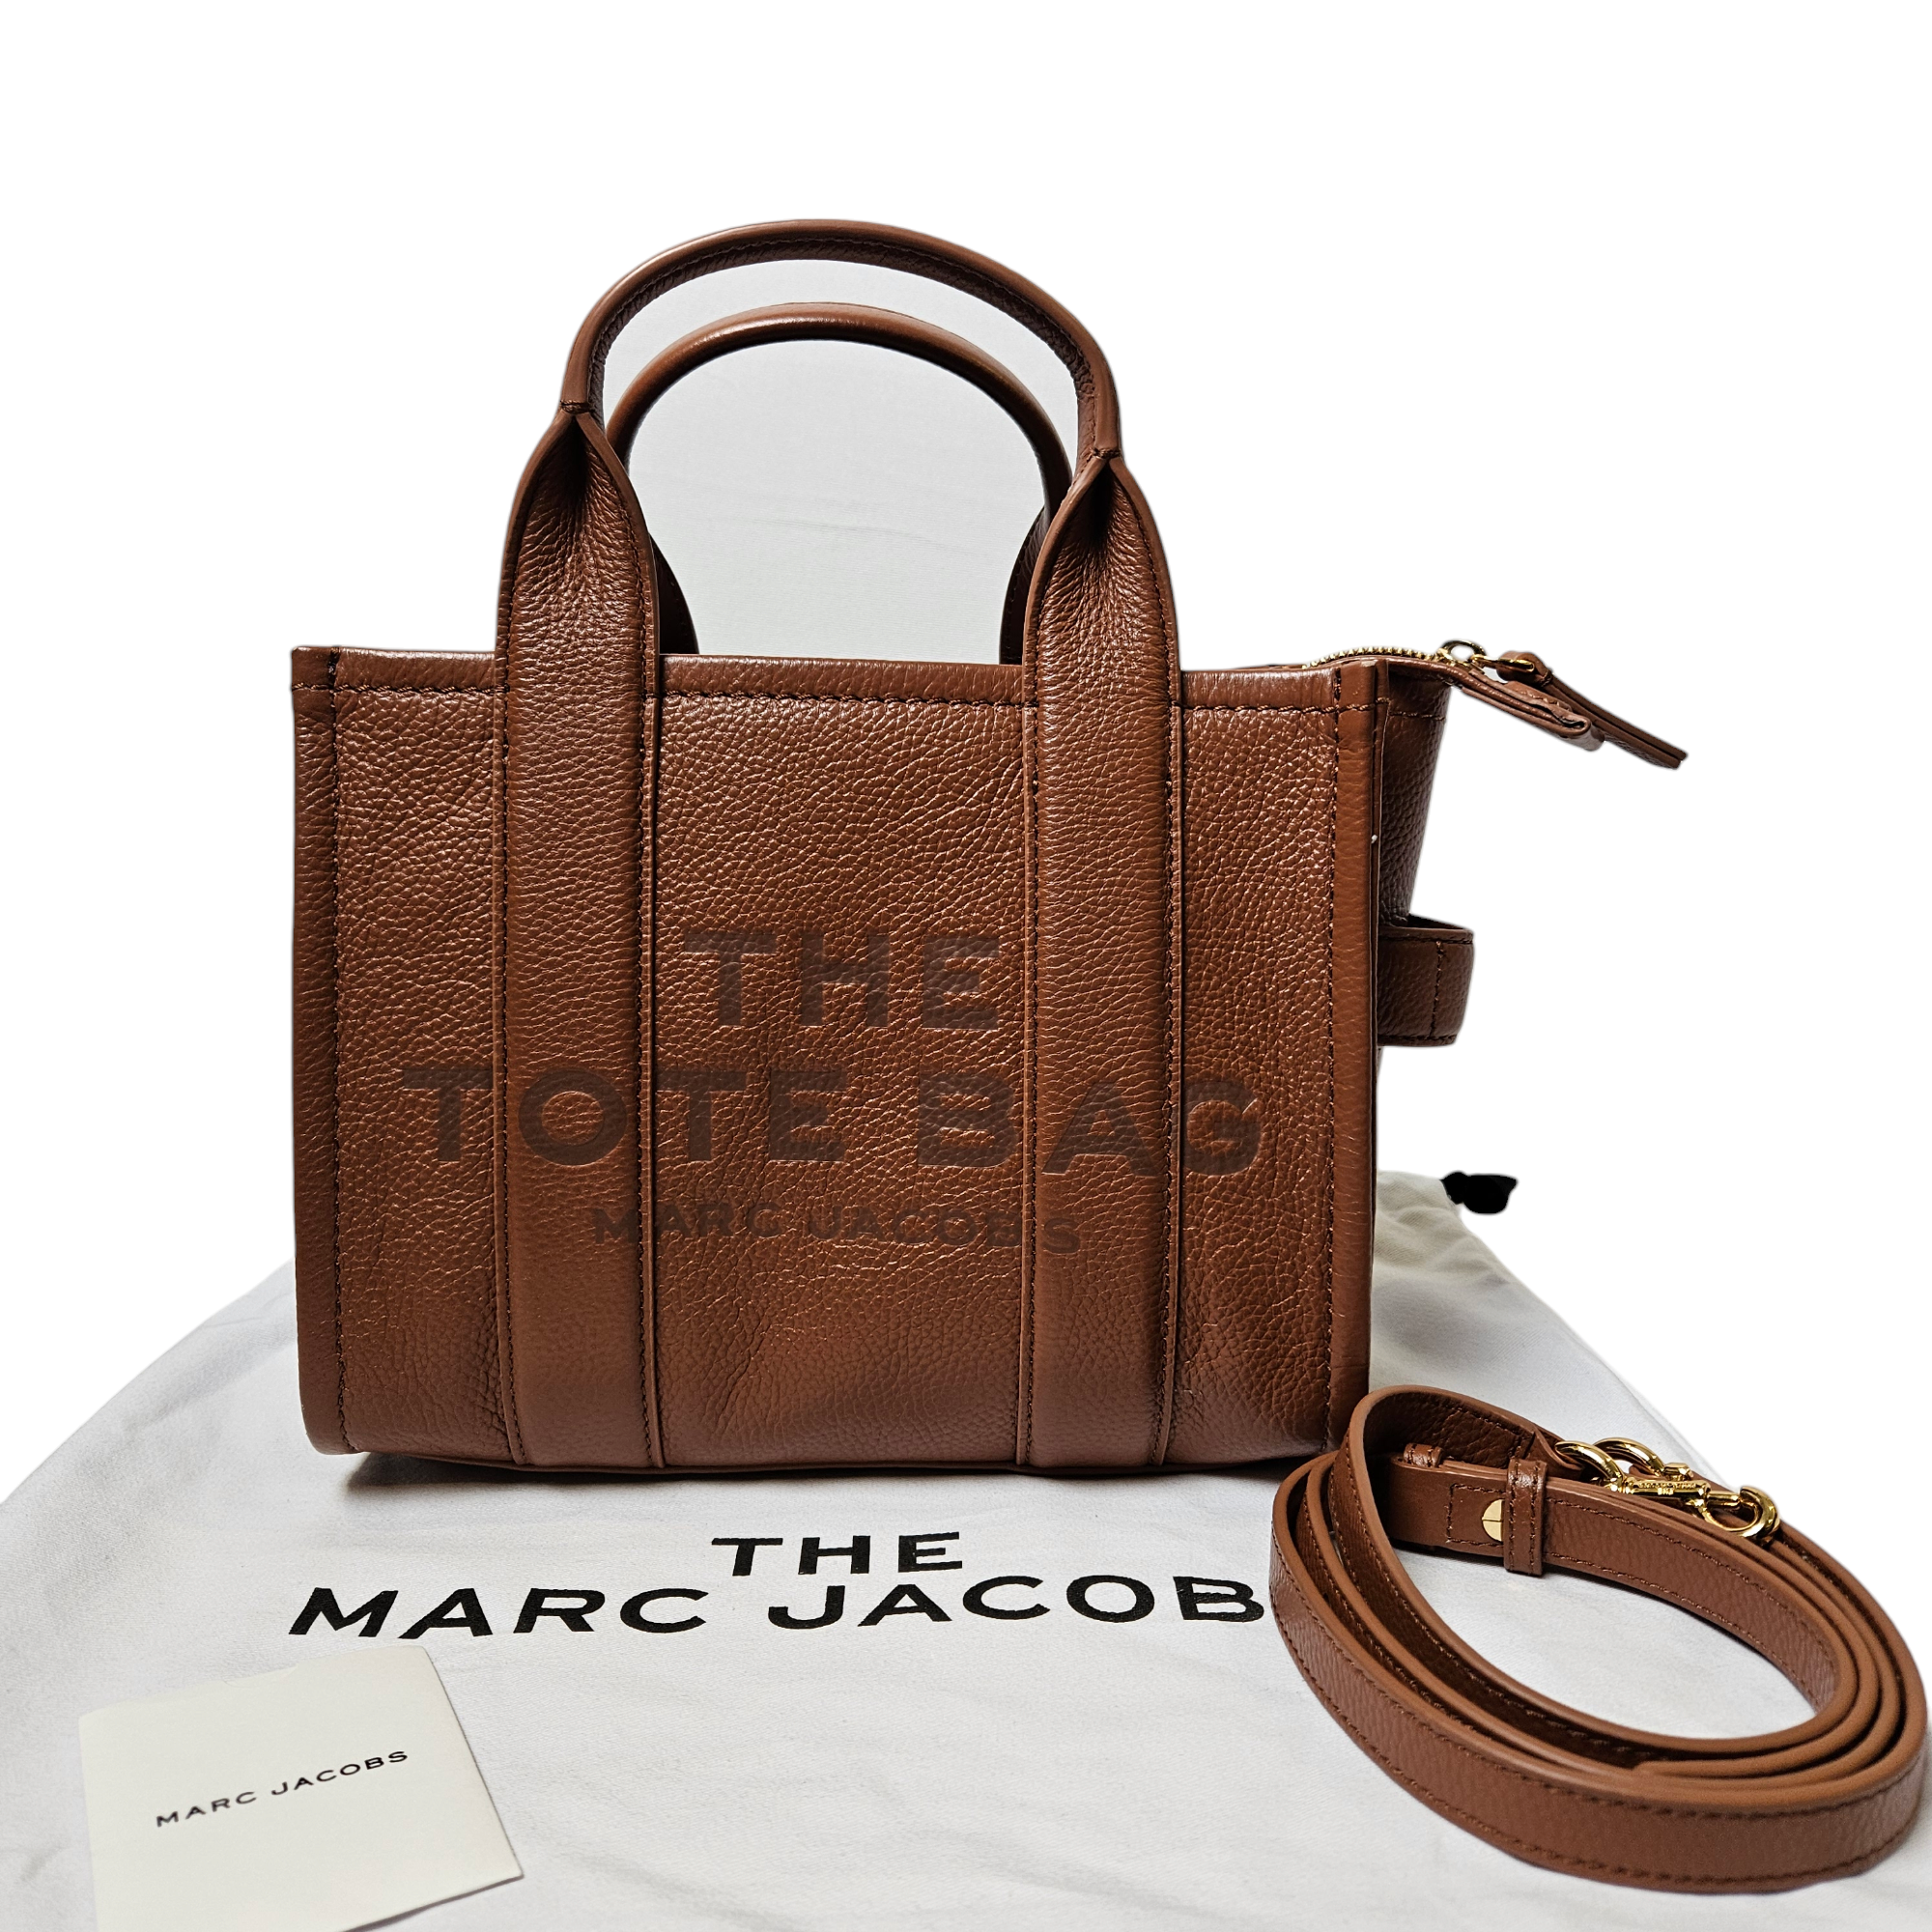 Marc Jacobs The Tote Bag Mini | What Fits Inside! - YouTube